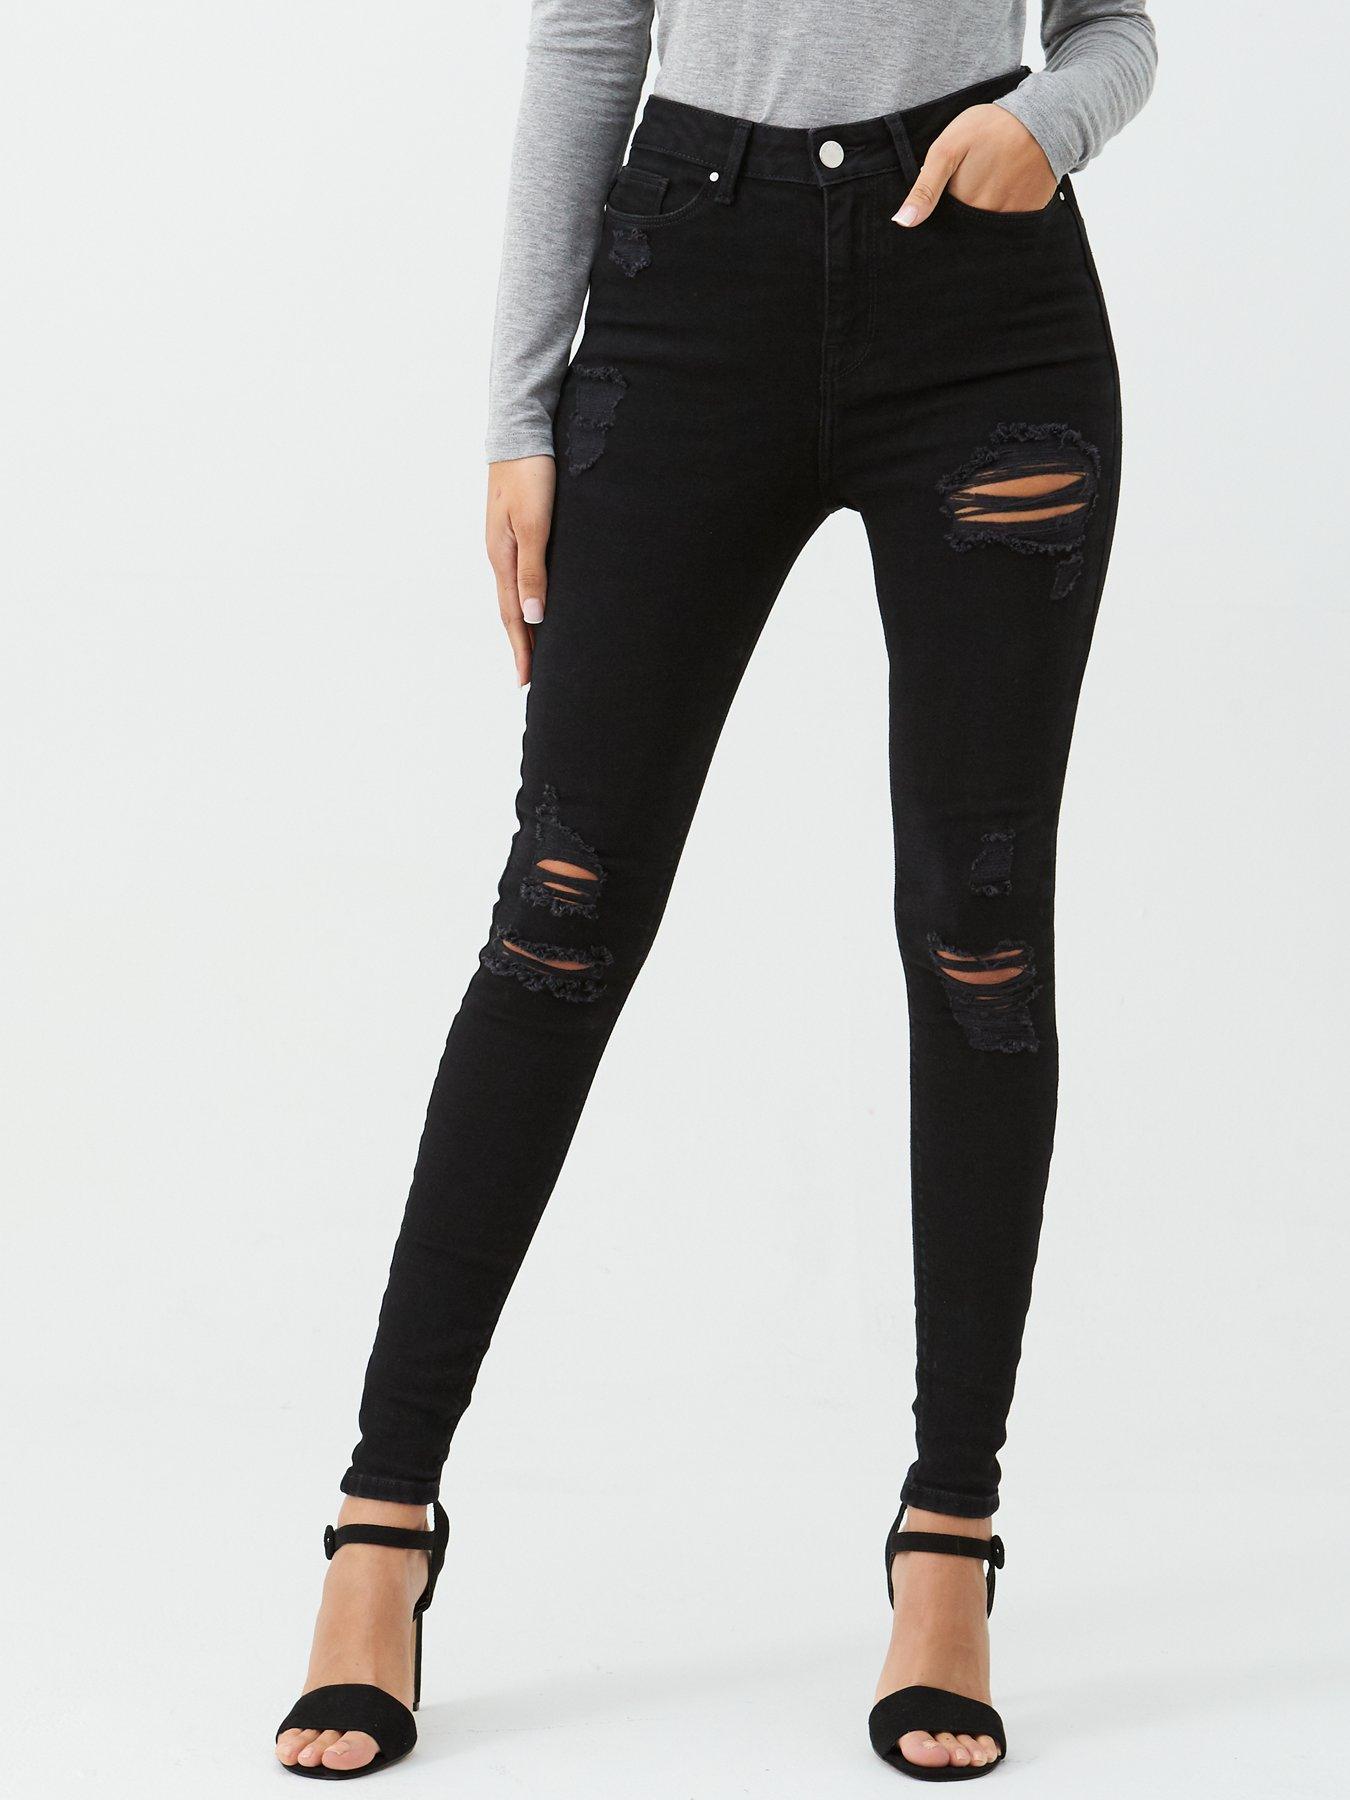 black friday womens jeans